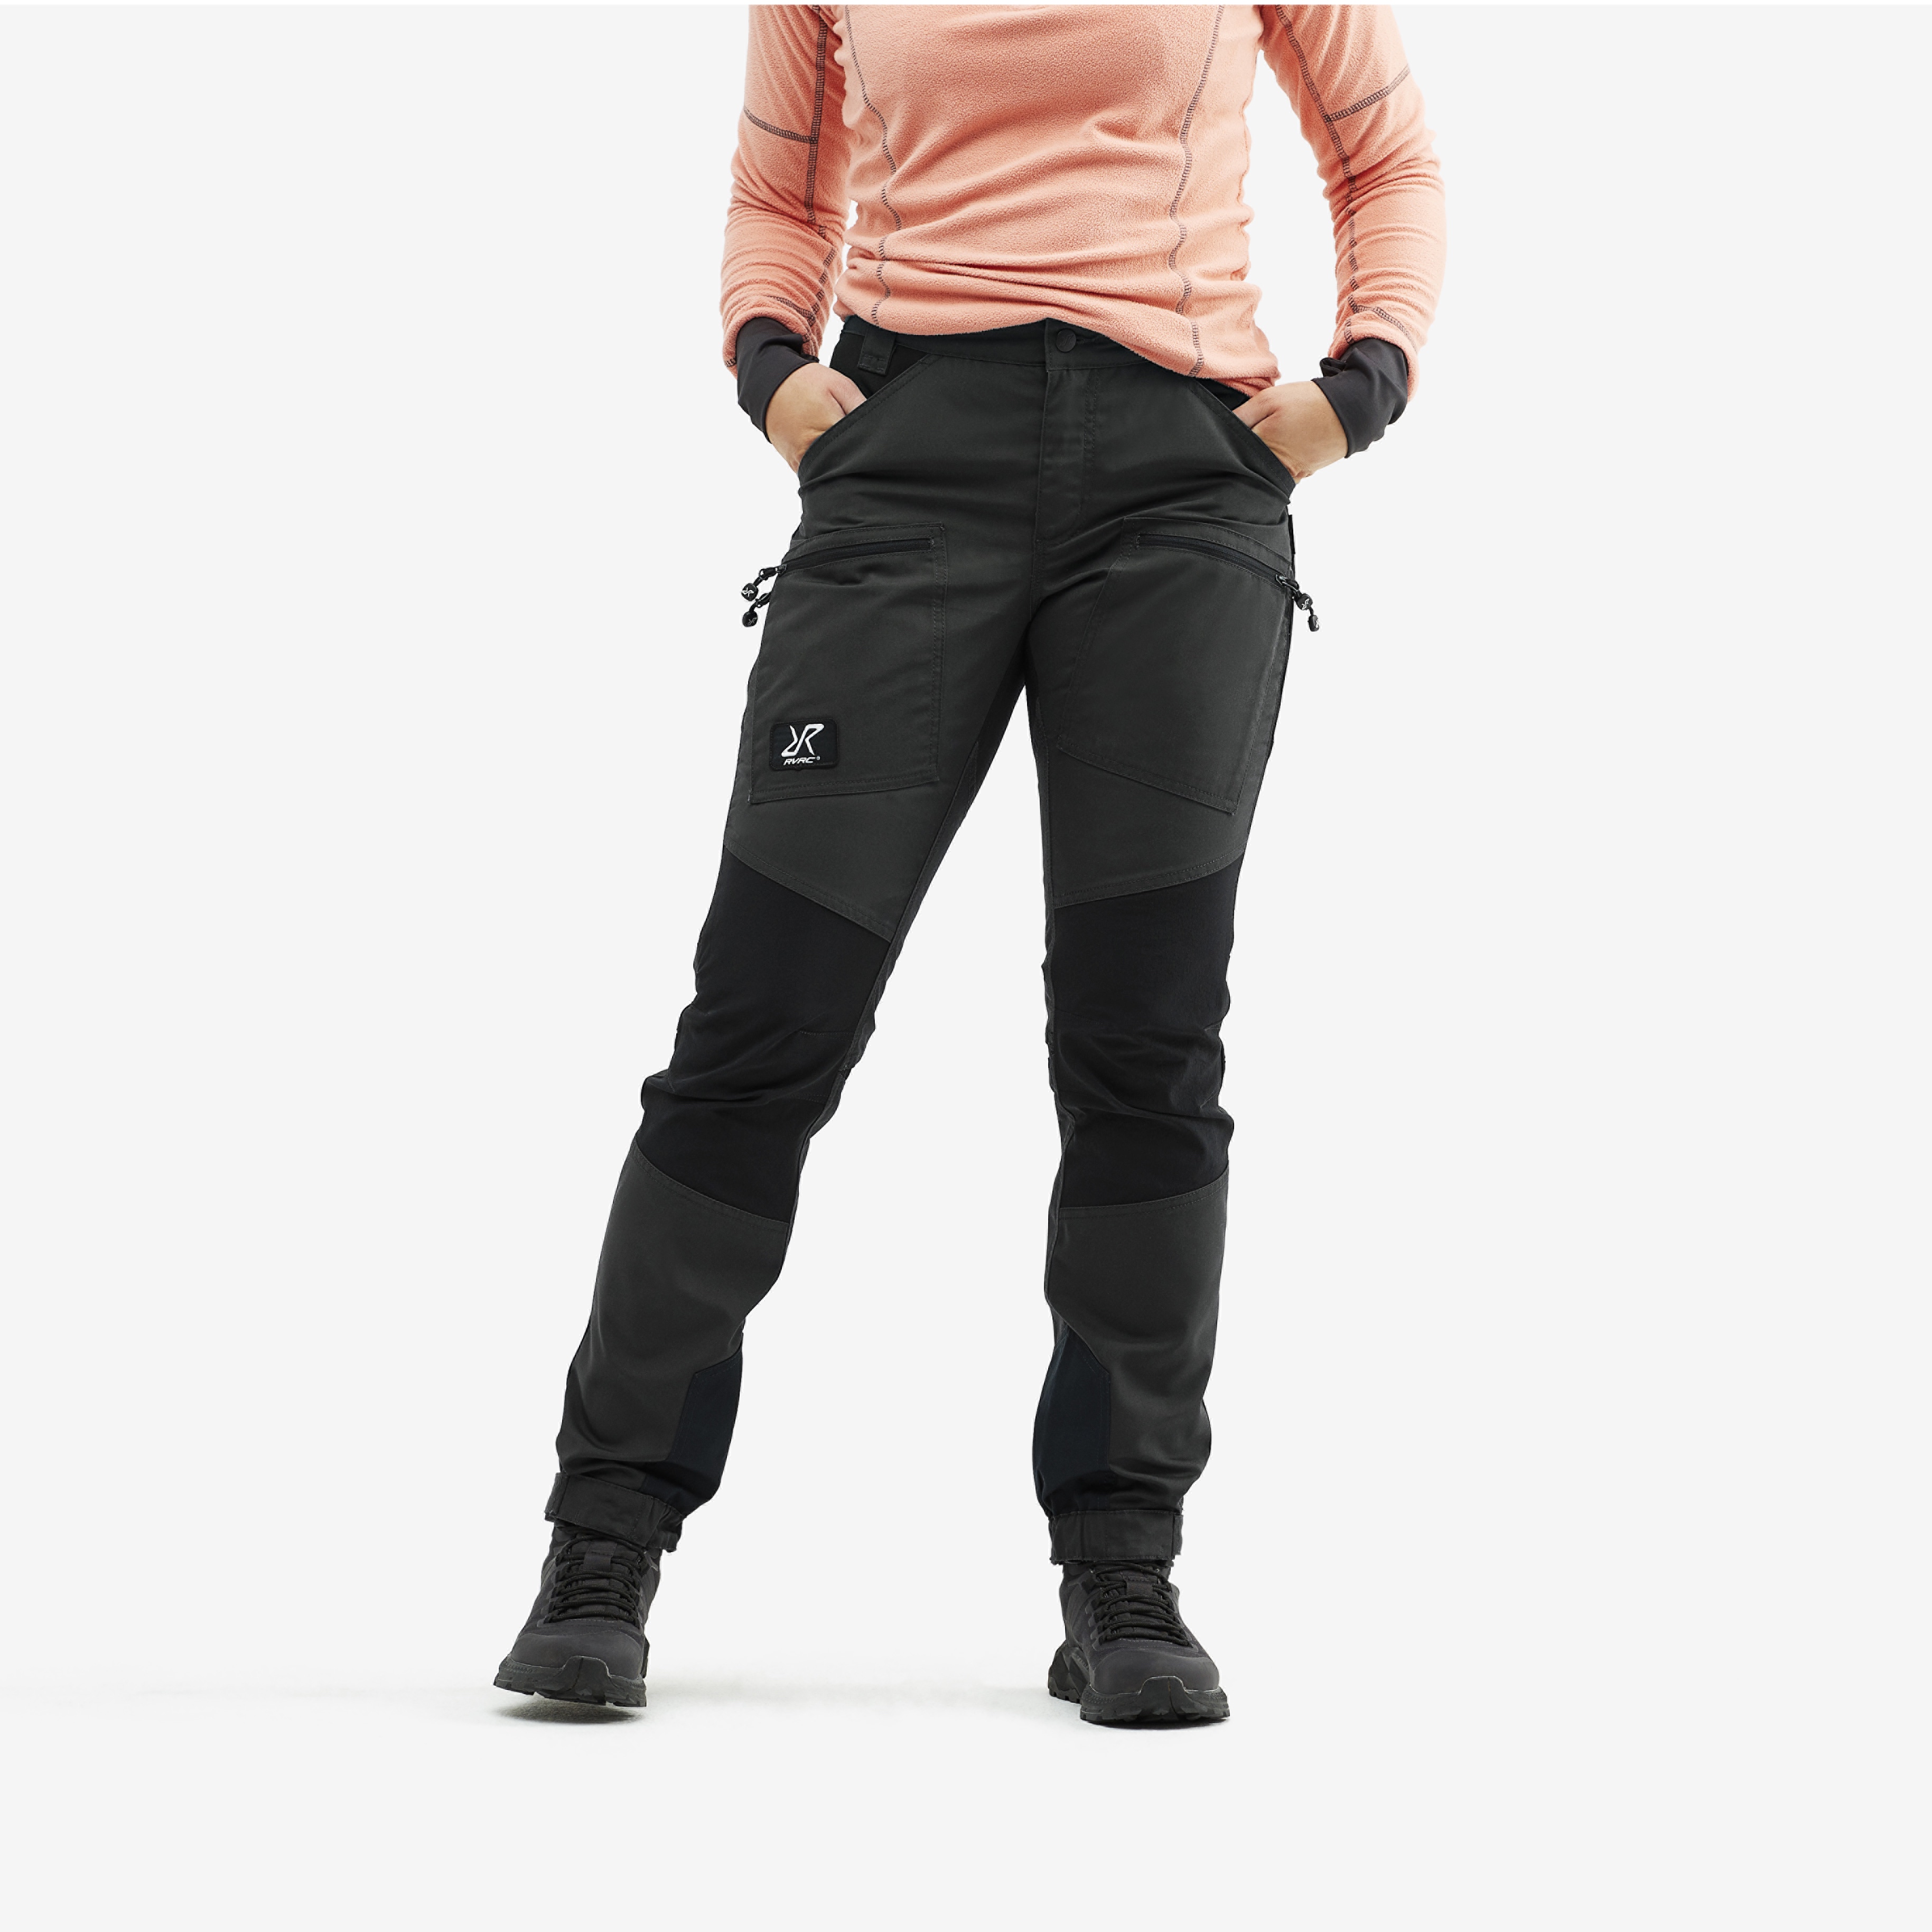 Nordwand Pro Short hiking trousers for women in dark grey